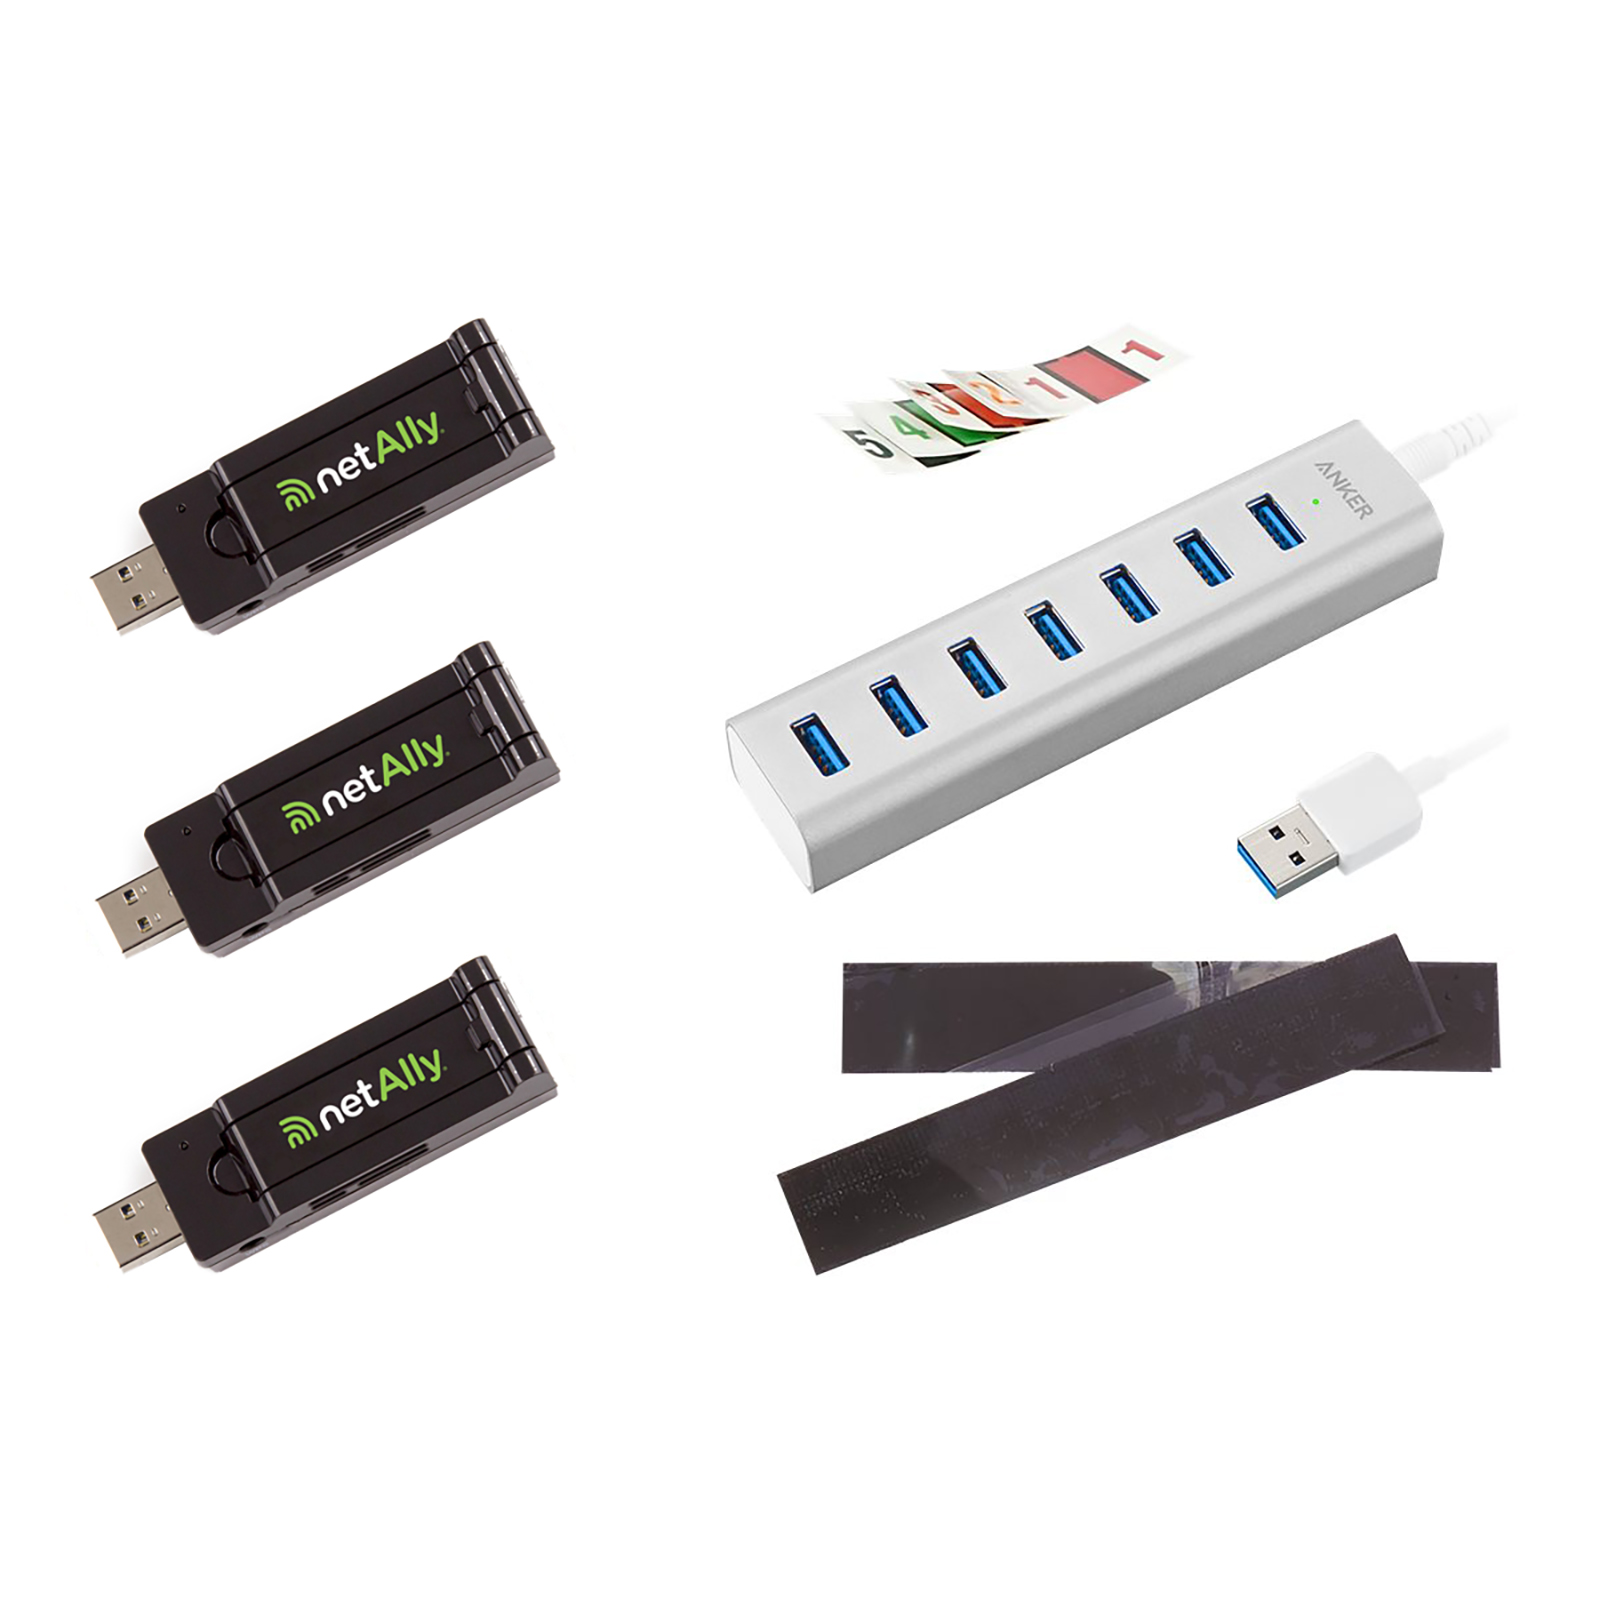 NetAlly Multi-Adapter kit for AirMagnet Wi-Fi Analyzer, includes 3 NetAlly D1080 802.11a/b/g/n/ac USB Adapters and a USB hub